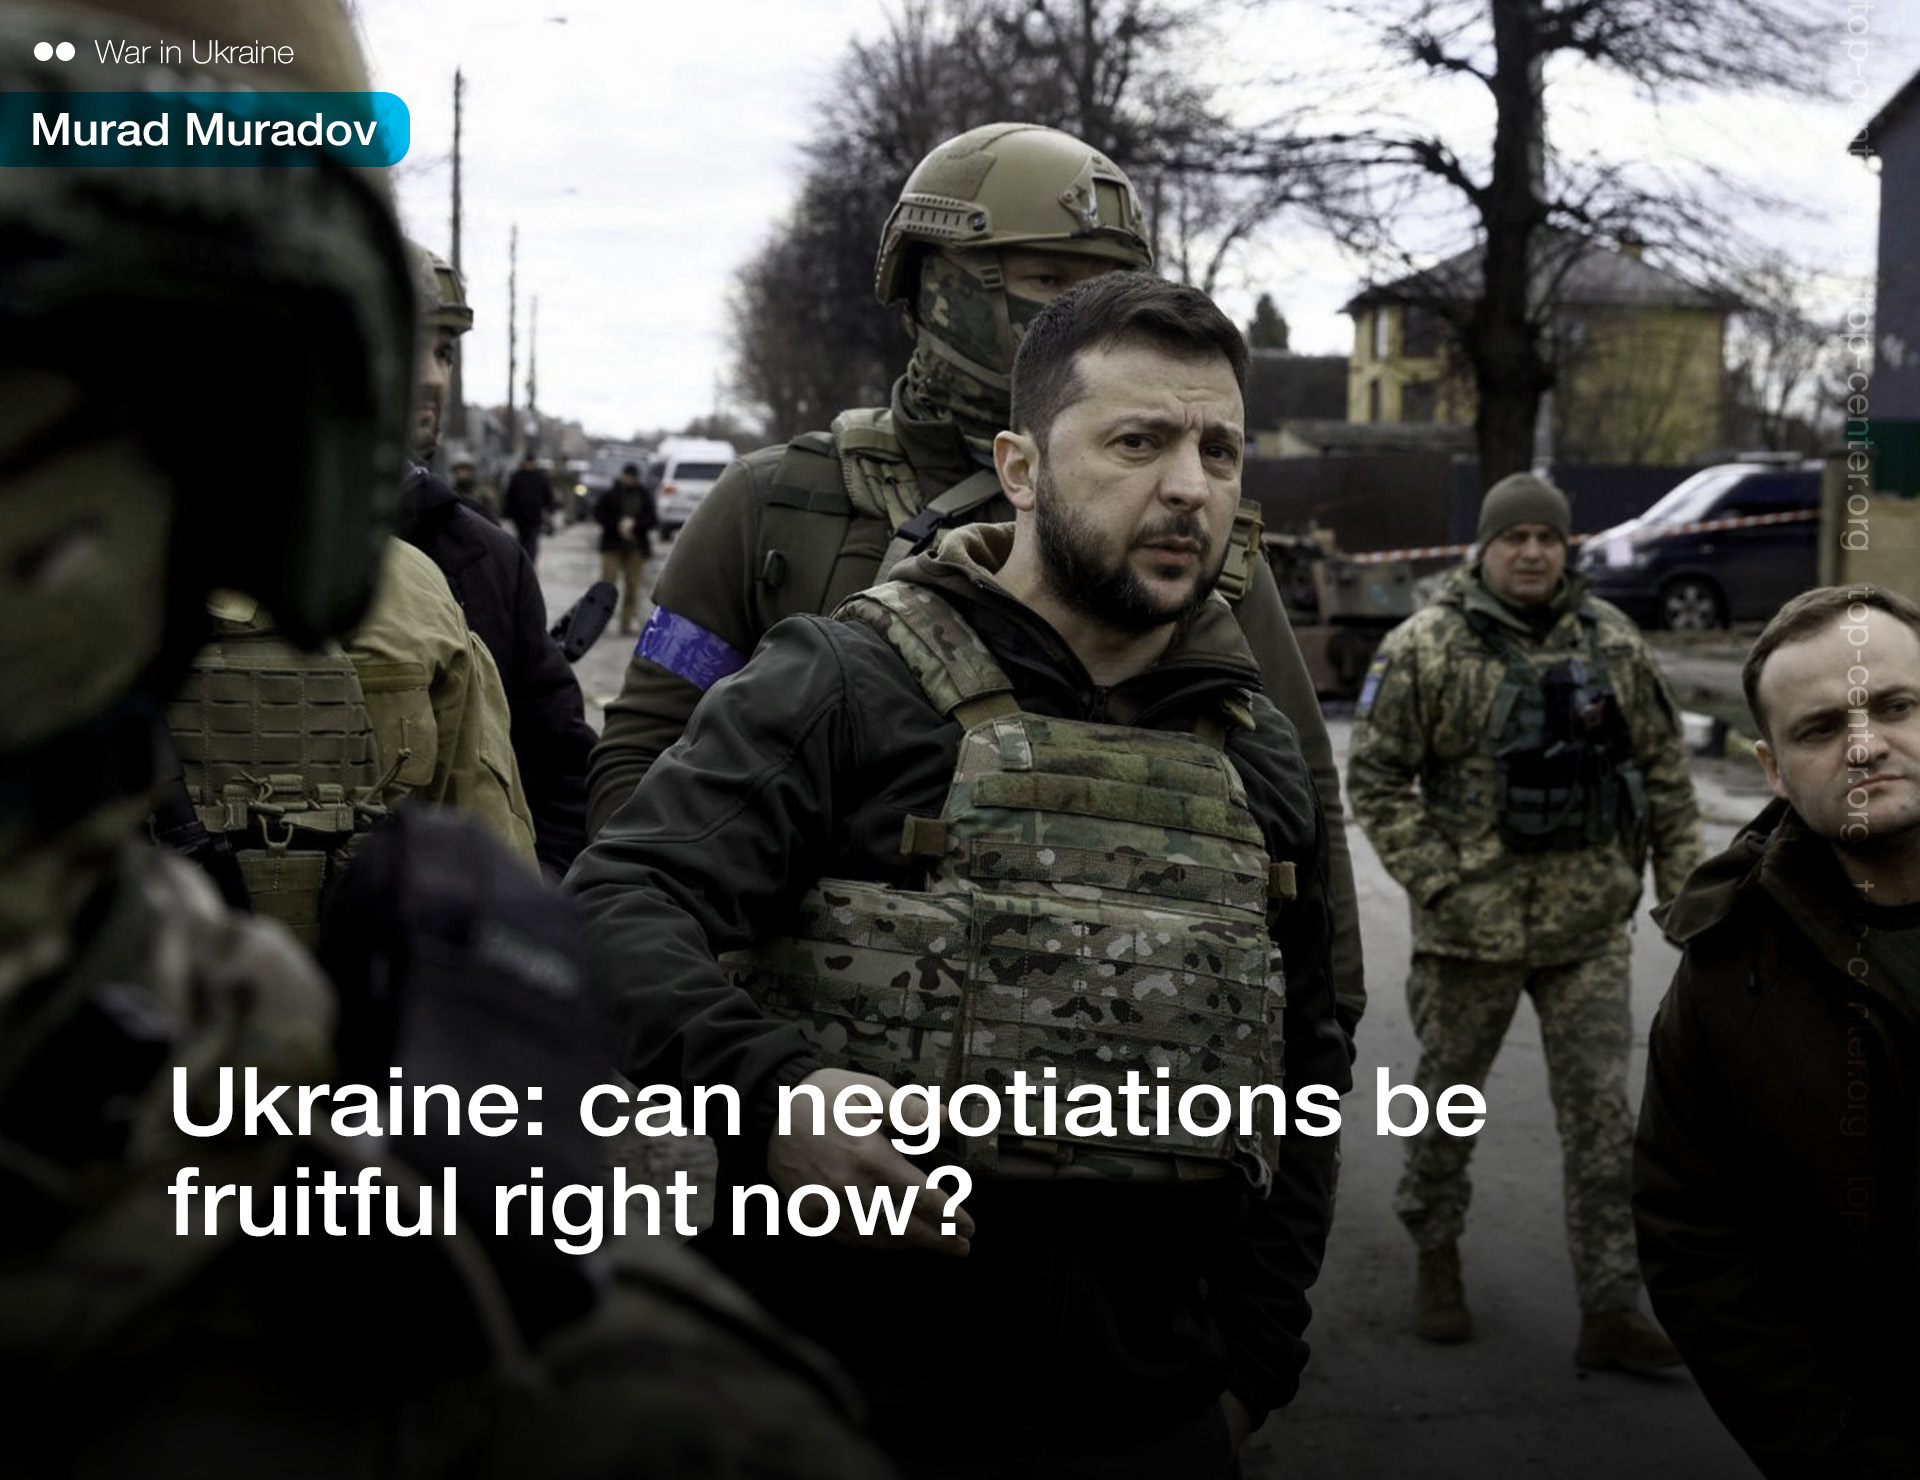 Ukraine: can negotiations be fruitful right now?